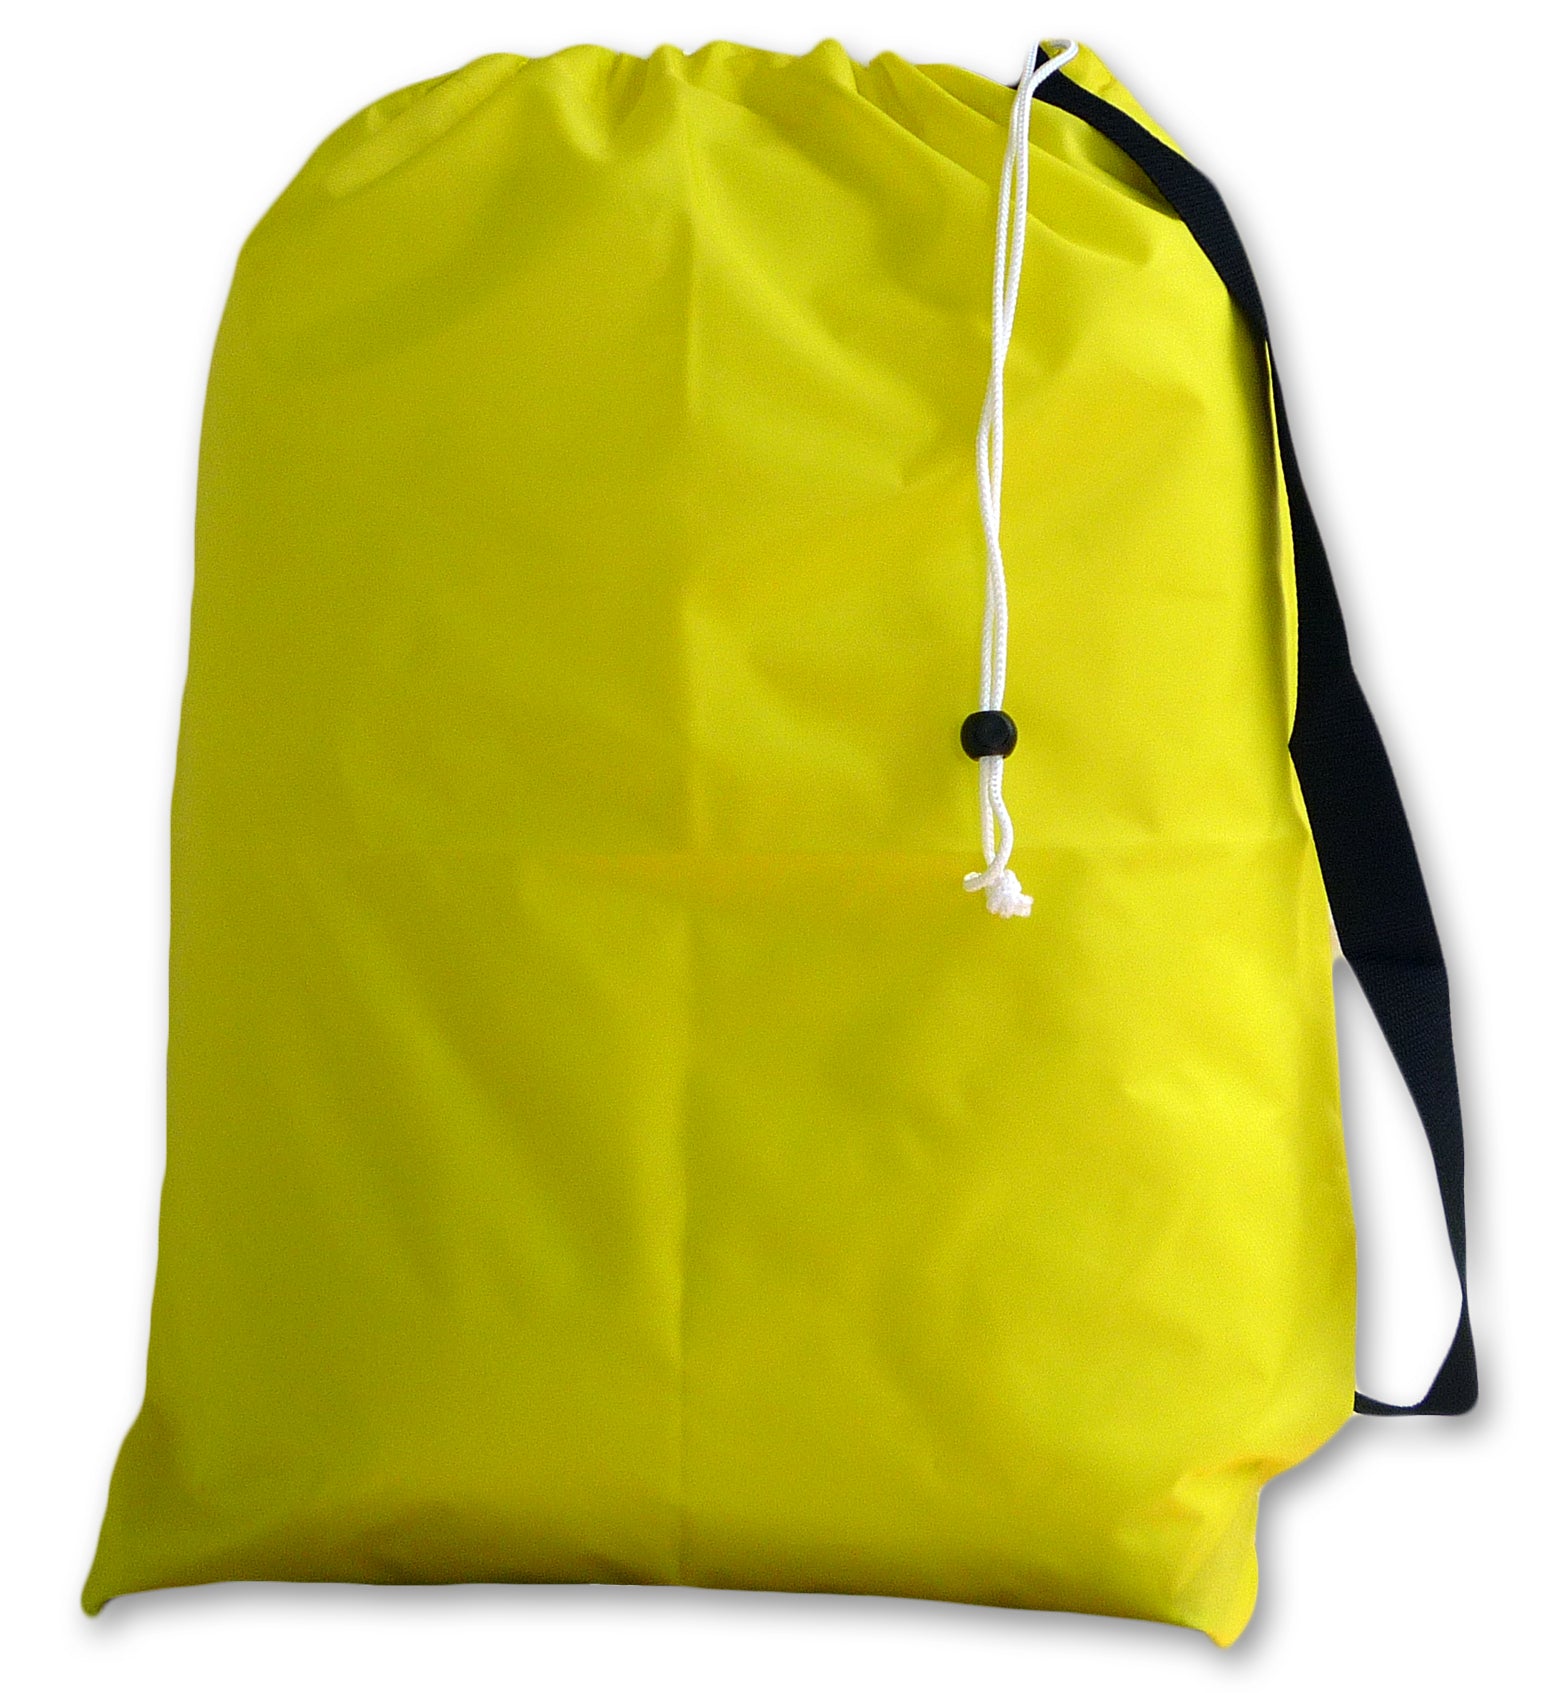 Small Laundry Bag, Drawstring, Carry Strap, Closure, Pick from 16 Colors